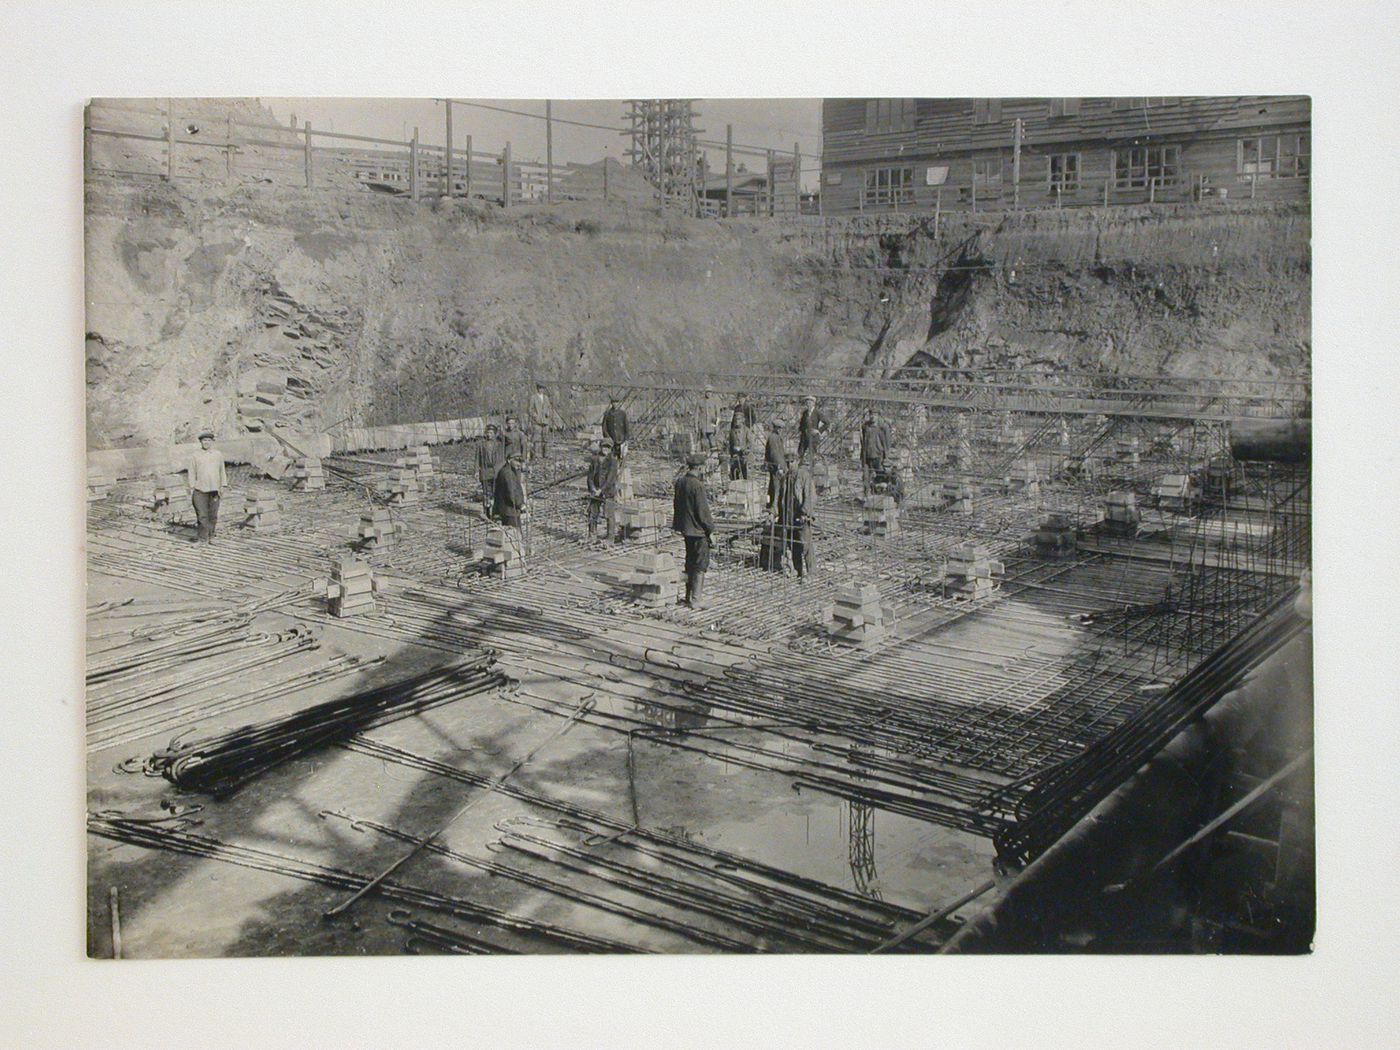 View of the Building of Industry foundation pit, Sverdlovsk, Soviet Union (now Ekaterinburg, Russia)